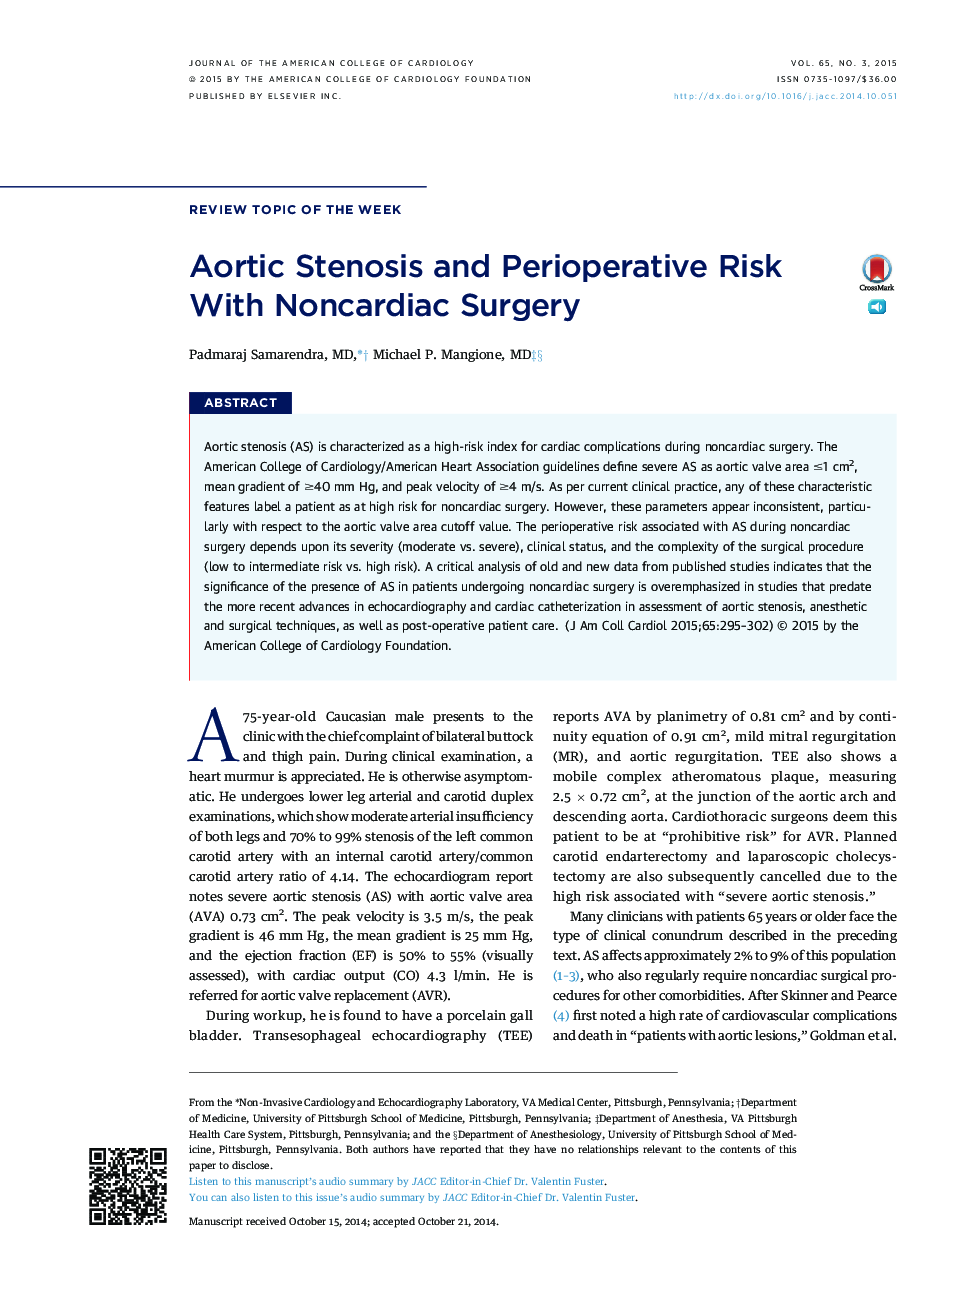 Aortic Stenosis and Perioperative Risk With Noncardiac Surgery 